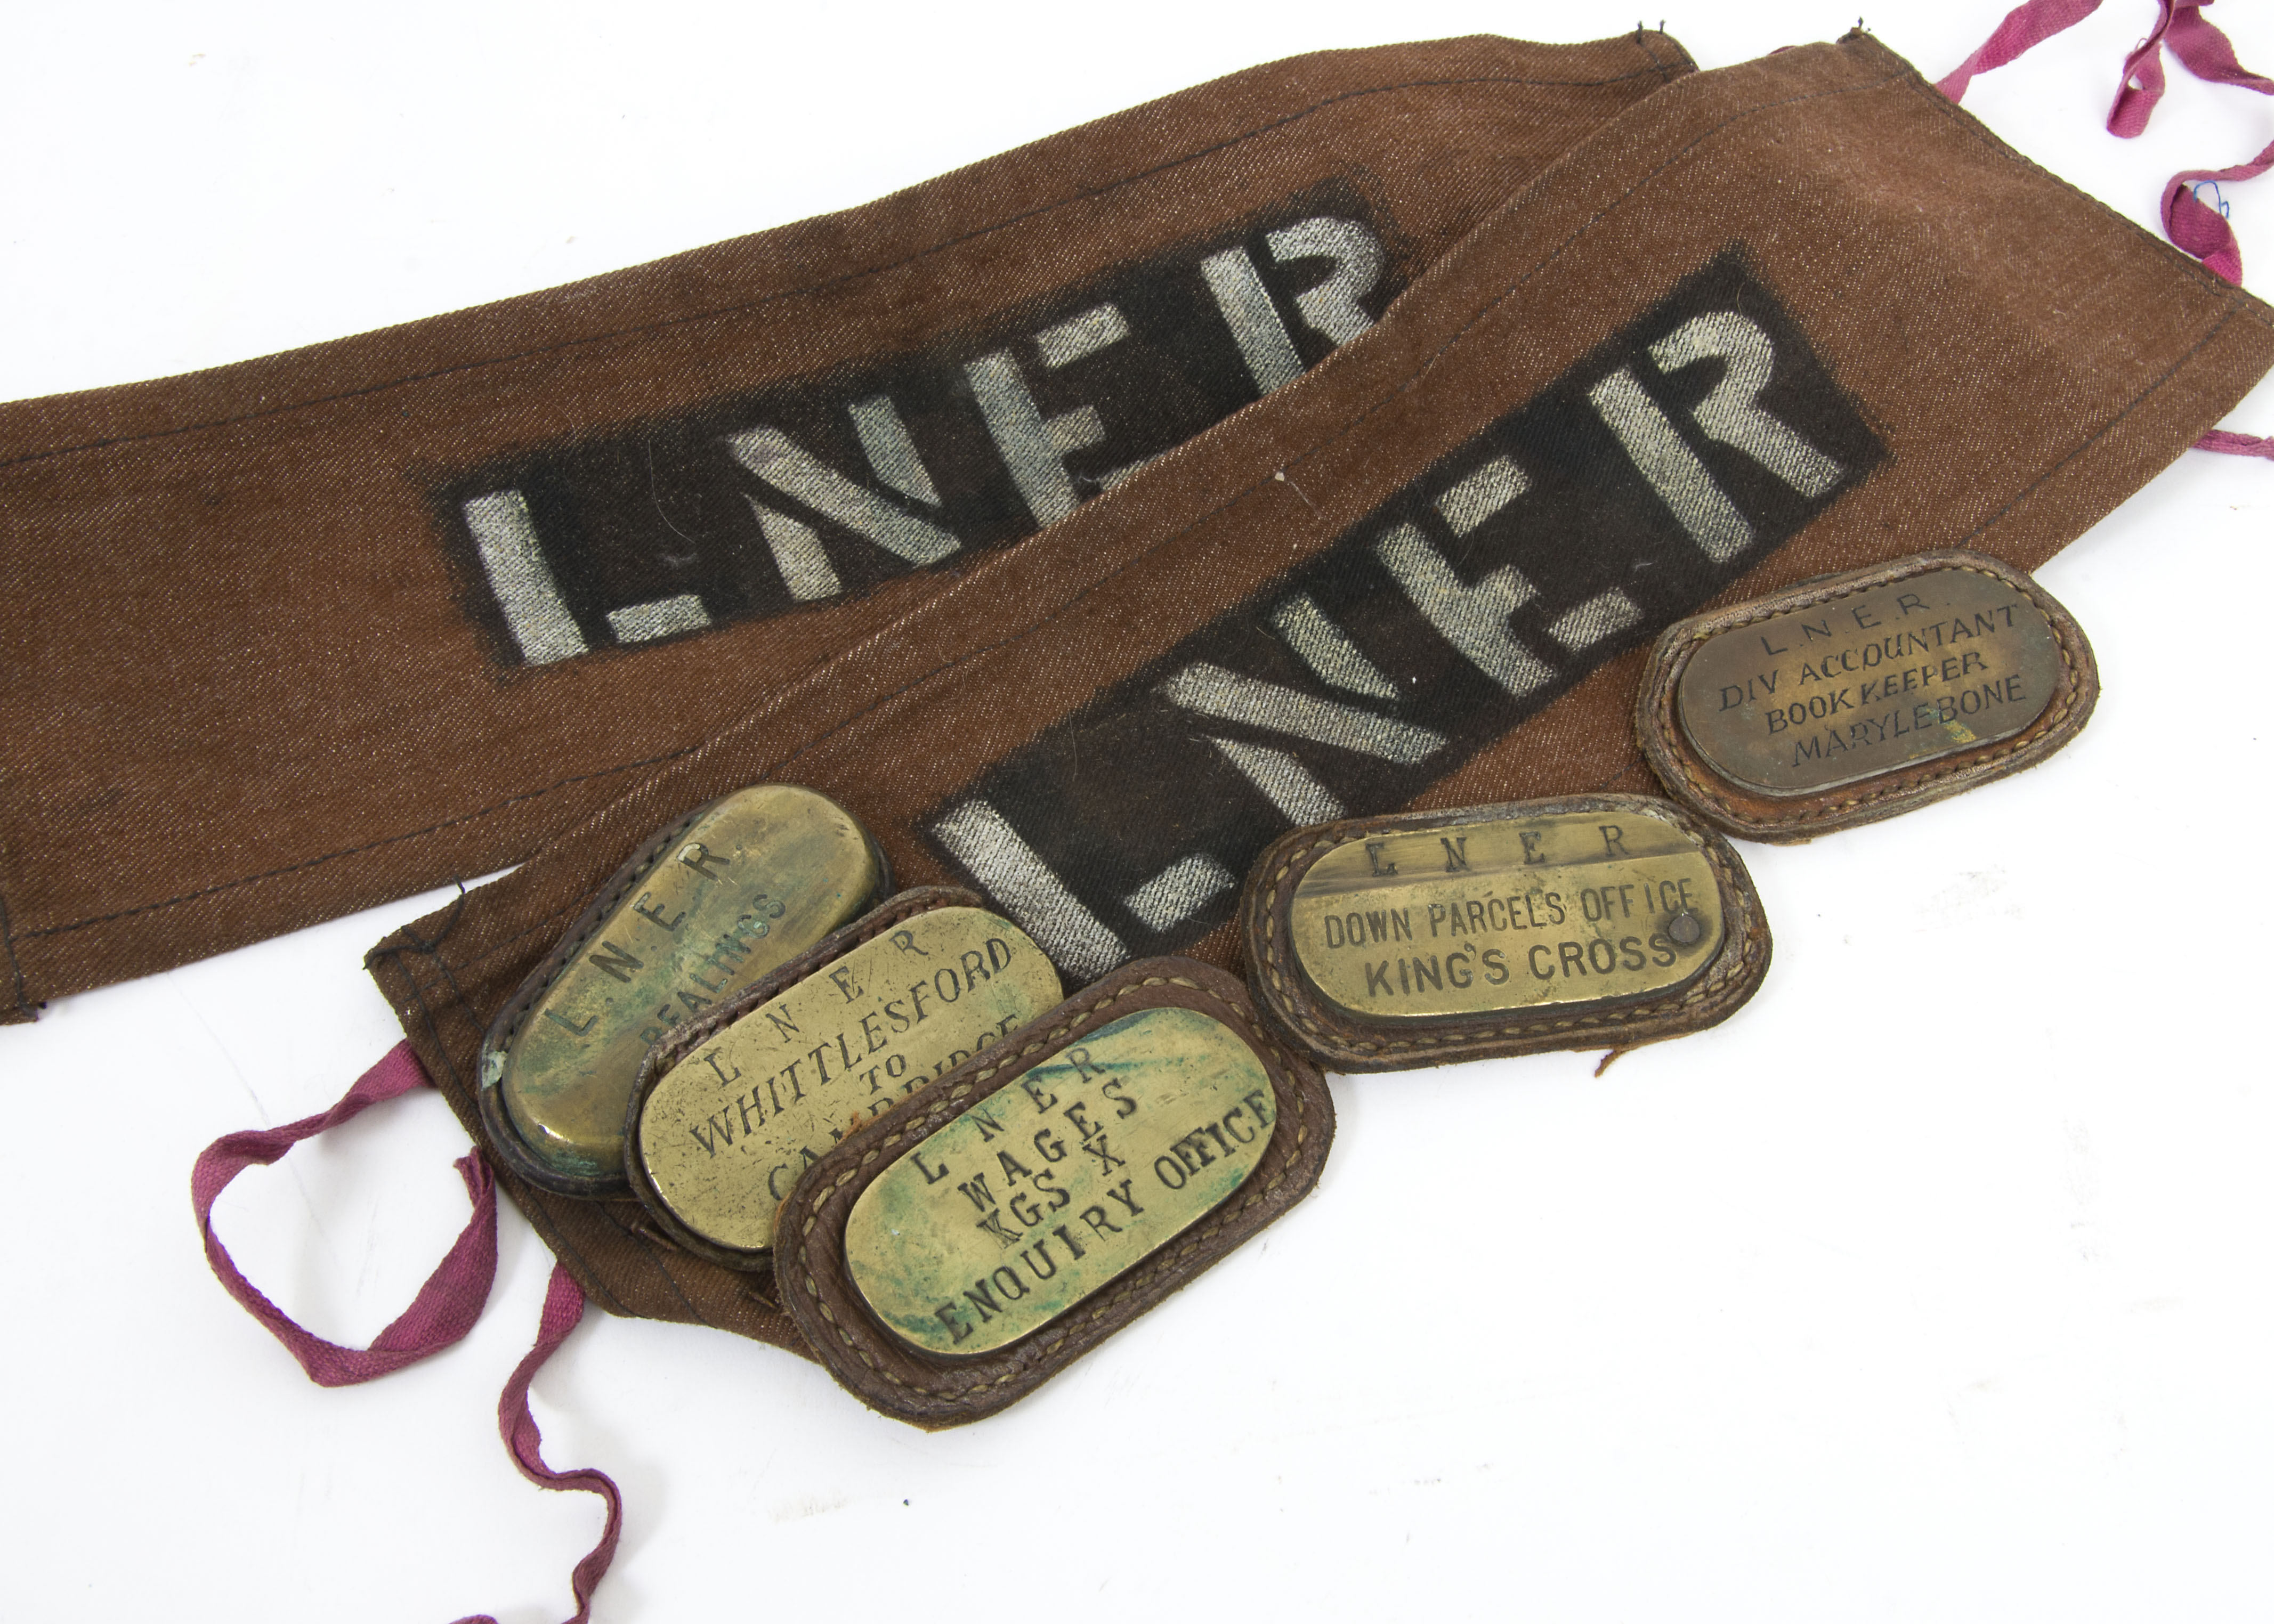 LNER Brass Satchel Name Plates and Arm Bands, two brown canvas arm bands printed LNER together